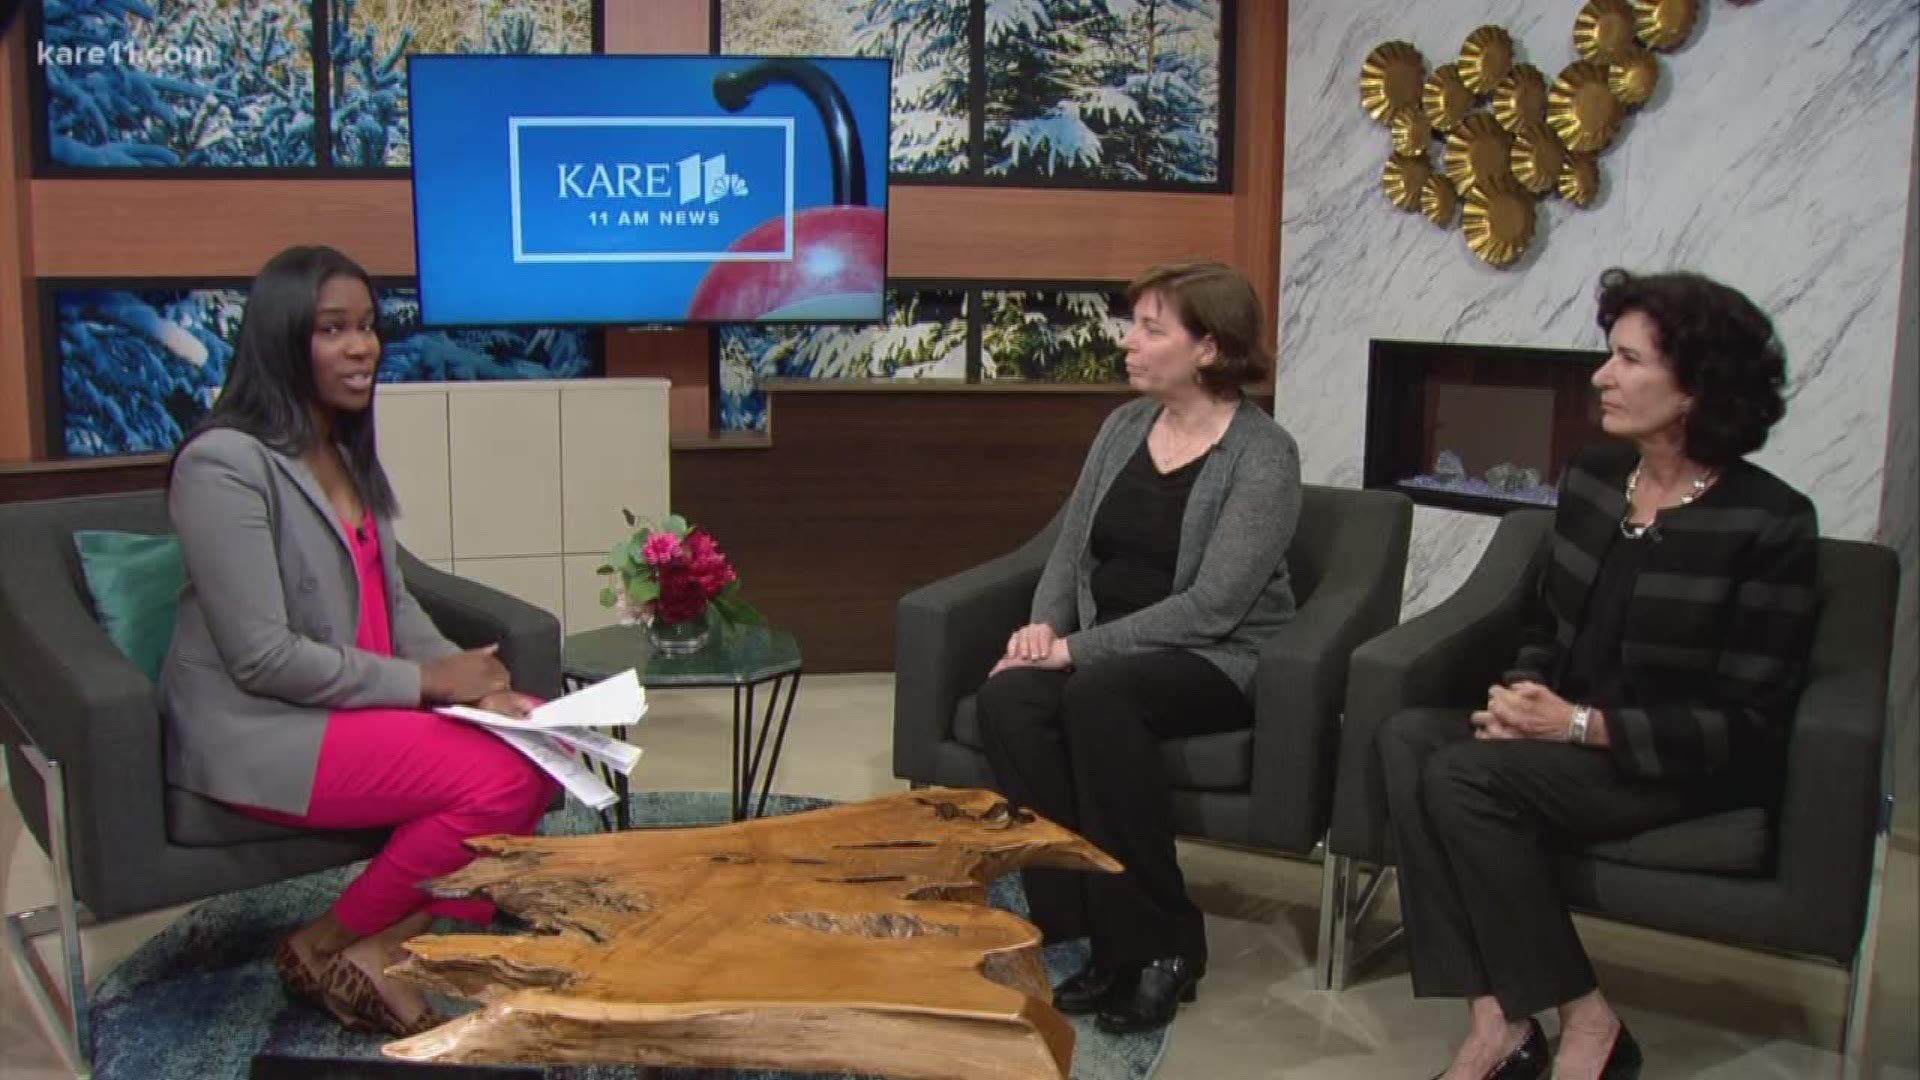 Dr. Kate Schaefers, from the University of Minnesota Advanced Careers Initiative, says "encore adults," those 50 years old and older, can benefit greatly from connecting to youth. https://kare11.tv/2IzzJq4